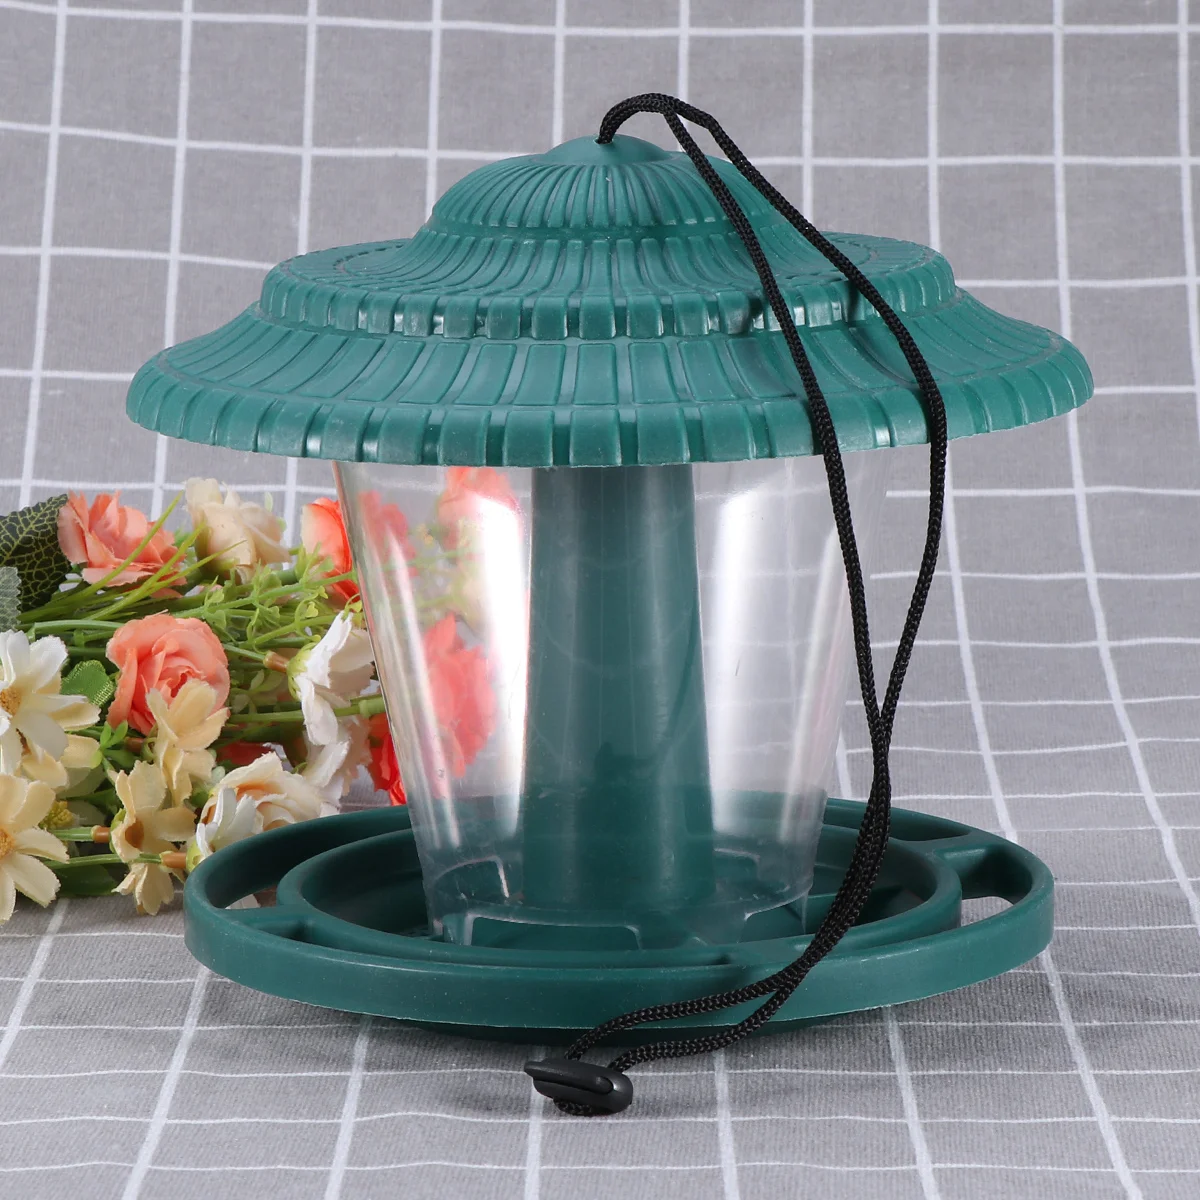 

Bird Feeder Hanging Wild Feeders Outside Garden Decoration Outdoor Squirrel Proof Feed Birds Cage Birdseed Houses Pole House